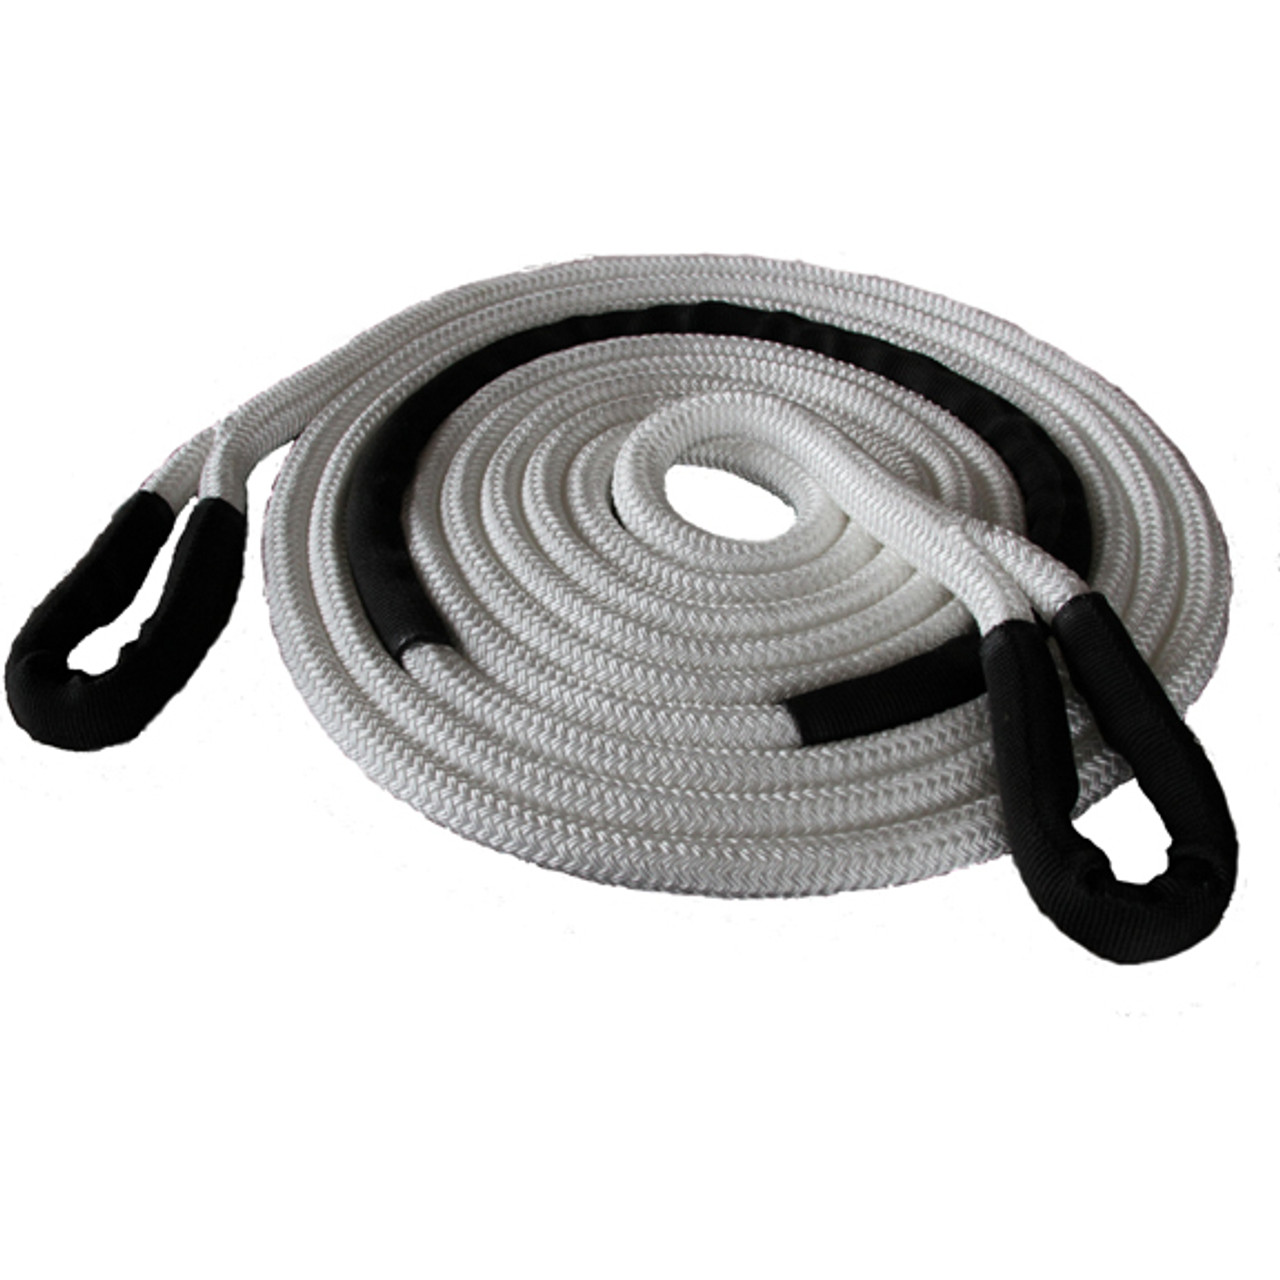 2" Kinetic Recovery Rope (131,500 lb MTS, 43,834 lb WLL)